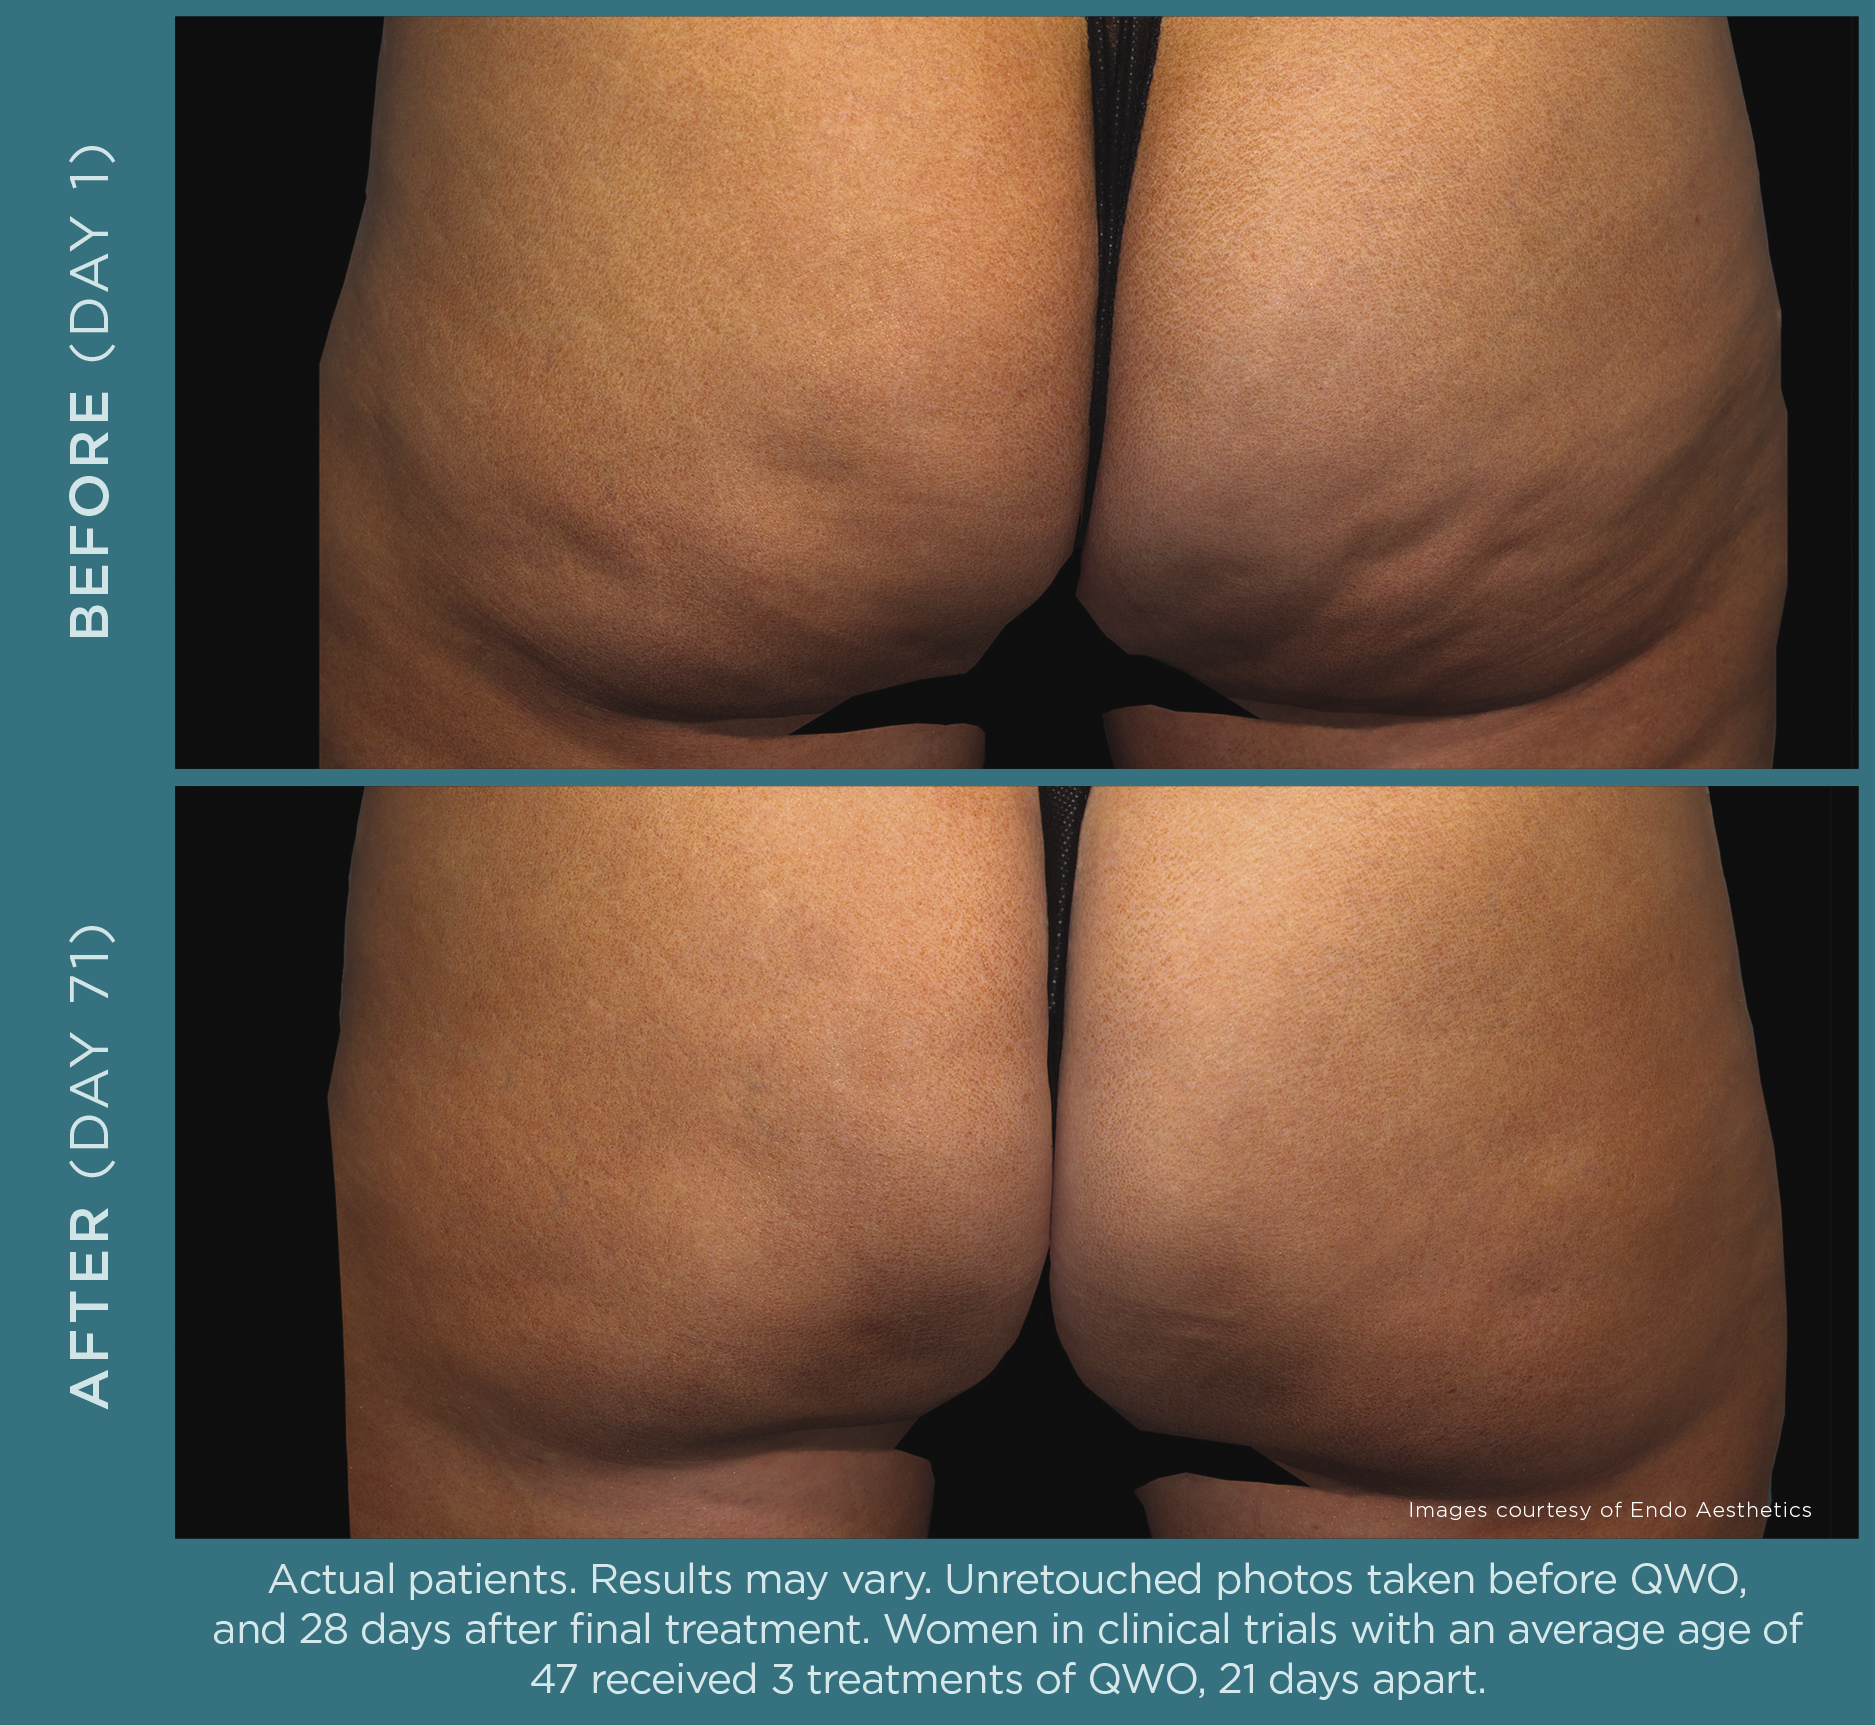 before and after qwo cellulite treatment on buttocks with much less cellulite after treatment